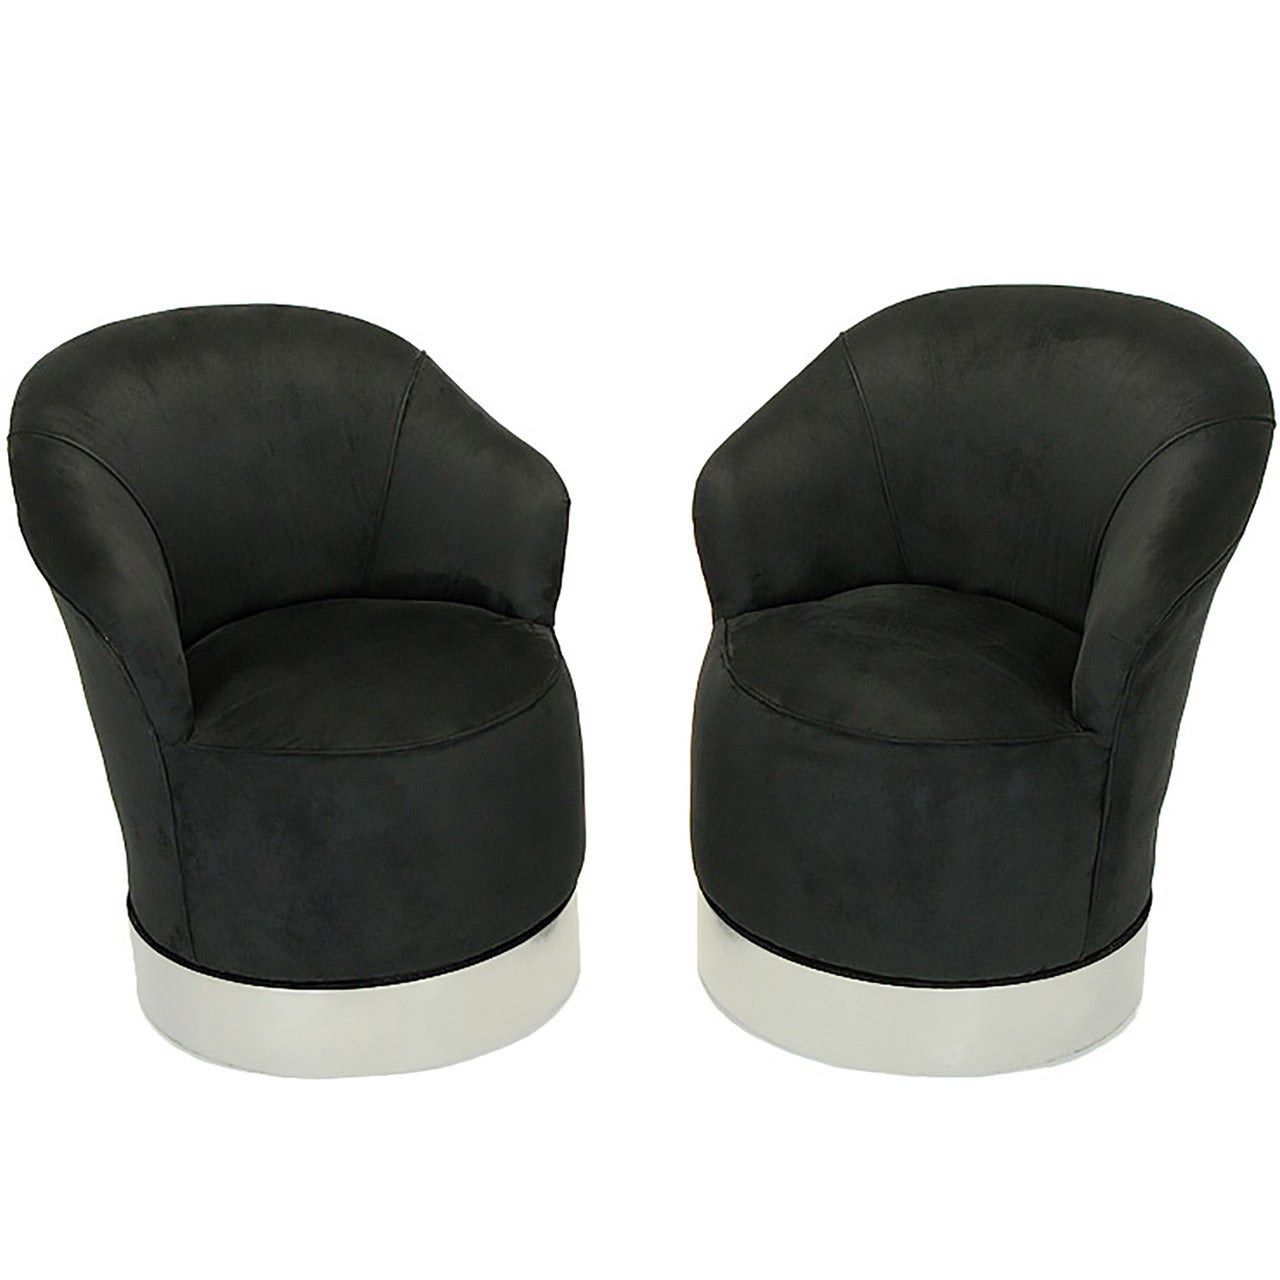 Pair of Sally Sirkin Lewis Blue and Black Ultrasuede Swivel Club Chairs For Sale